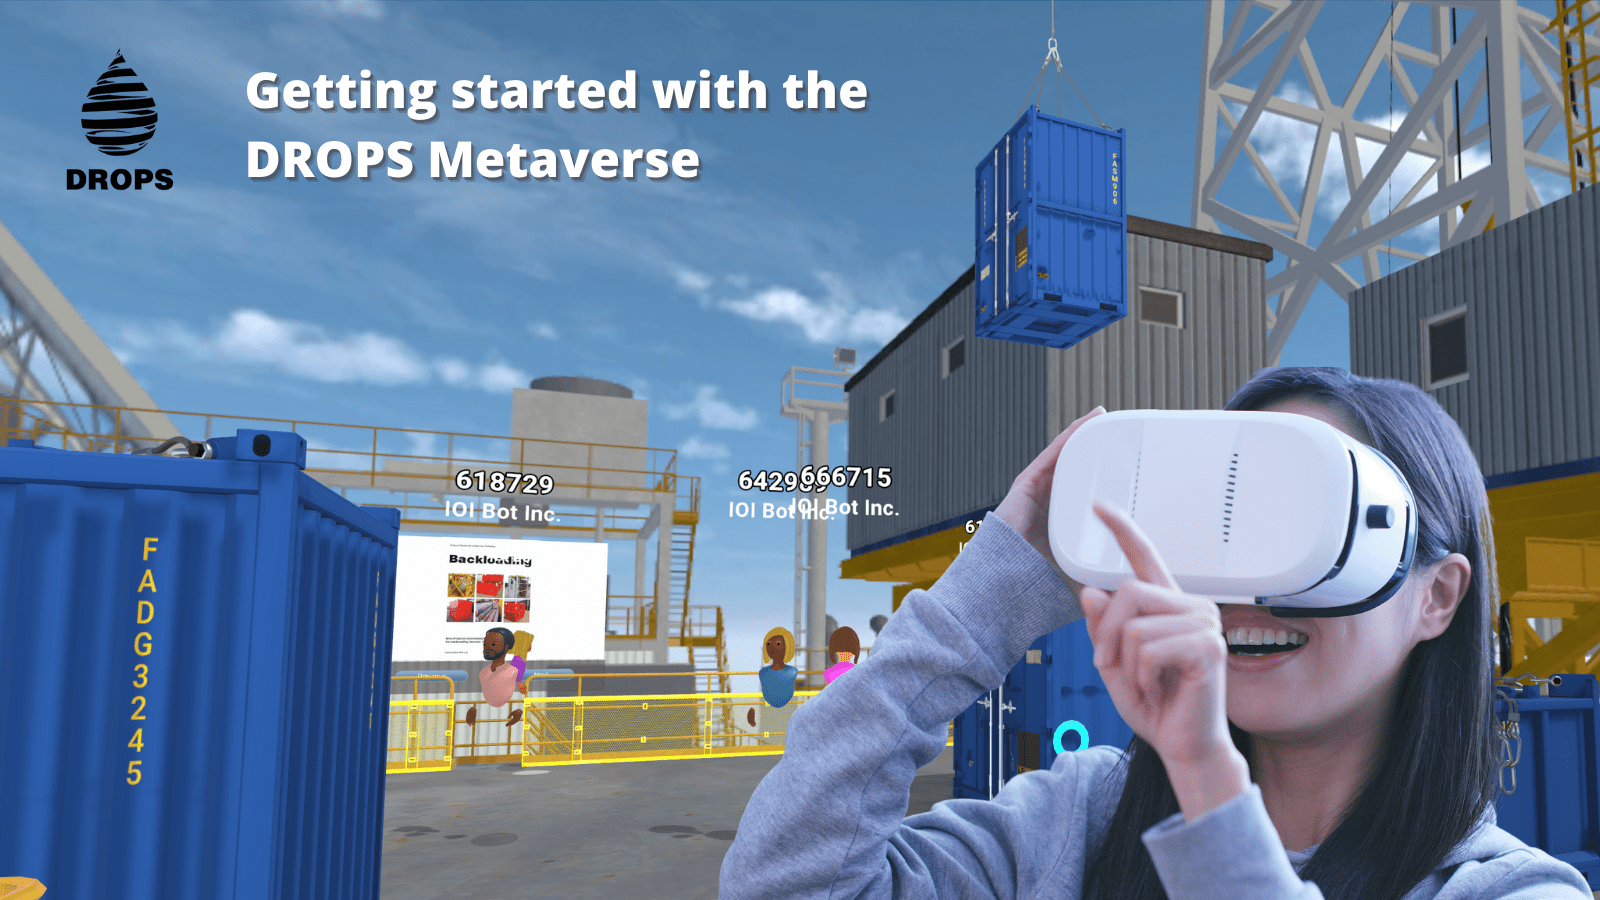 Girl with virtual reality headset on trying out the DROPS Metaverse